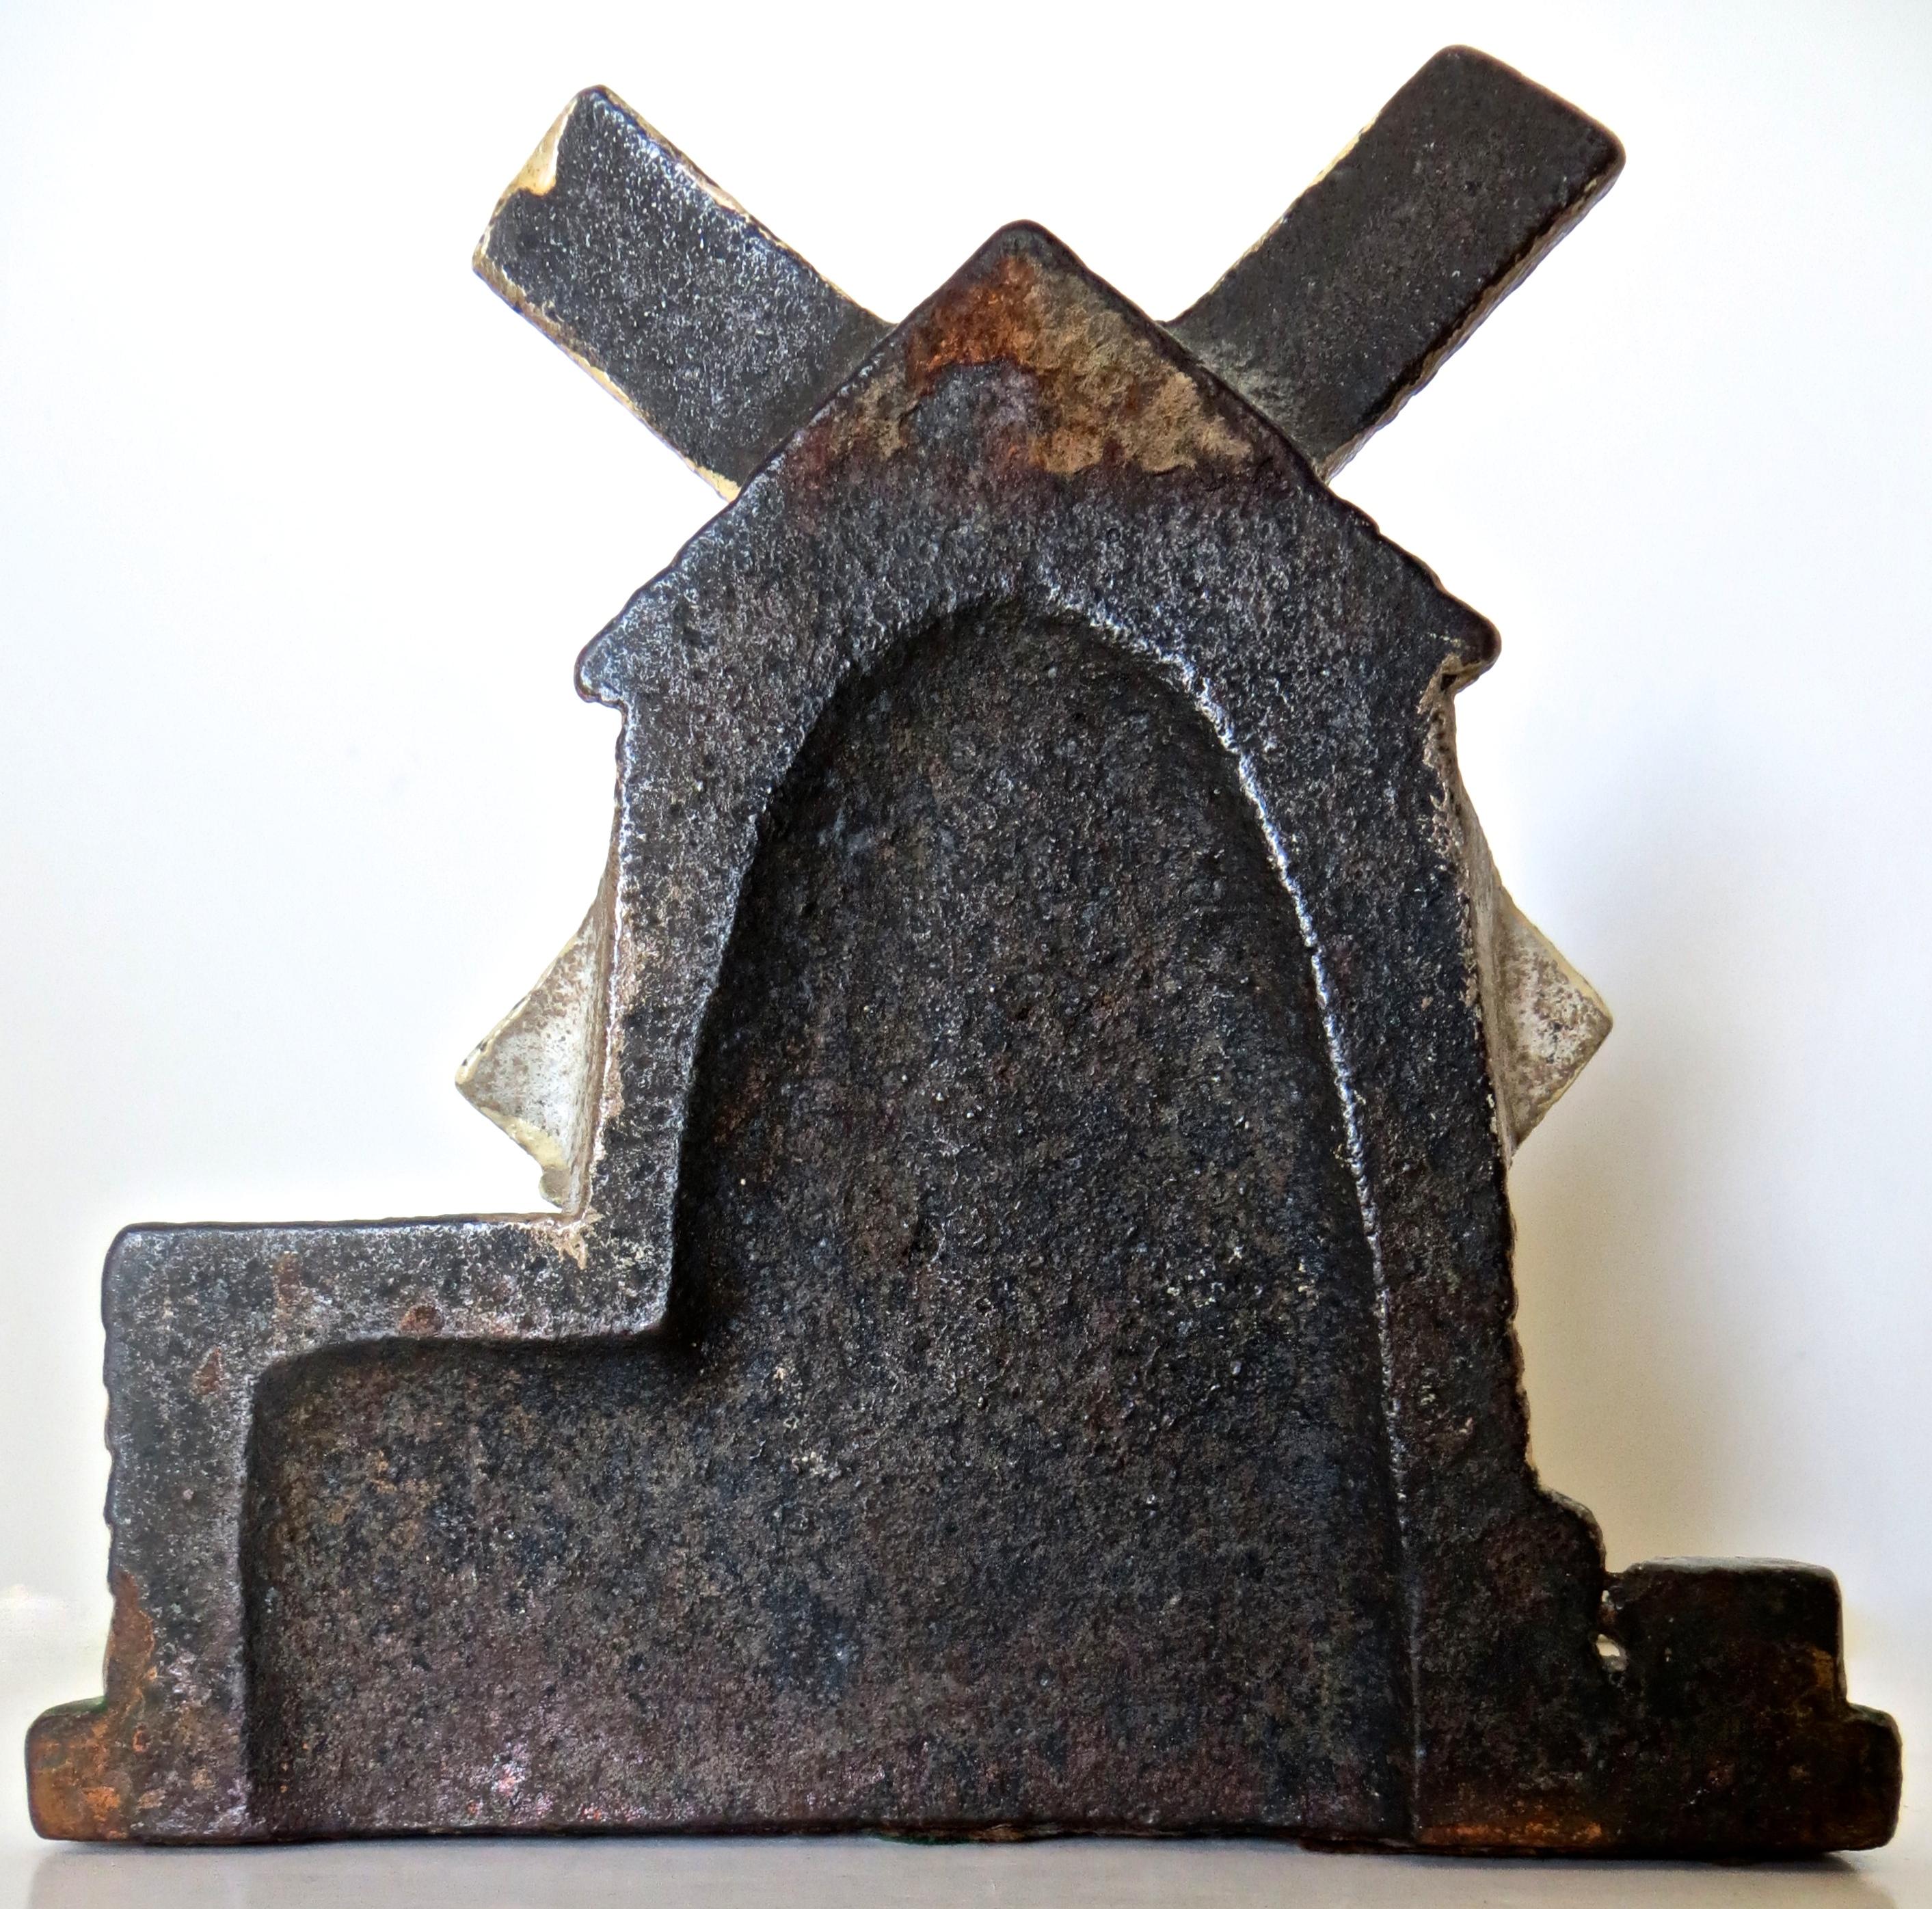 Cast iron doorstop depicts a windmill that perhaps exists in Cape Cod, with detailed casting of offset blades to the windmill itself, bricks to the facing of the housing structure, and steps leading up to both doorways. Manufactured by 